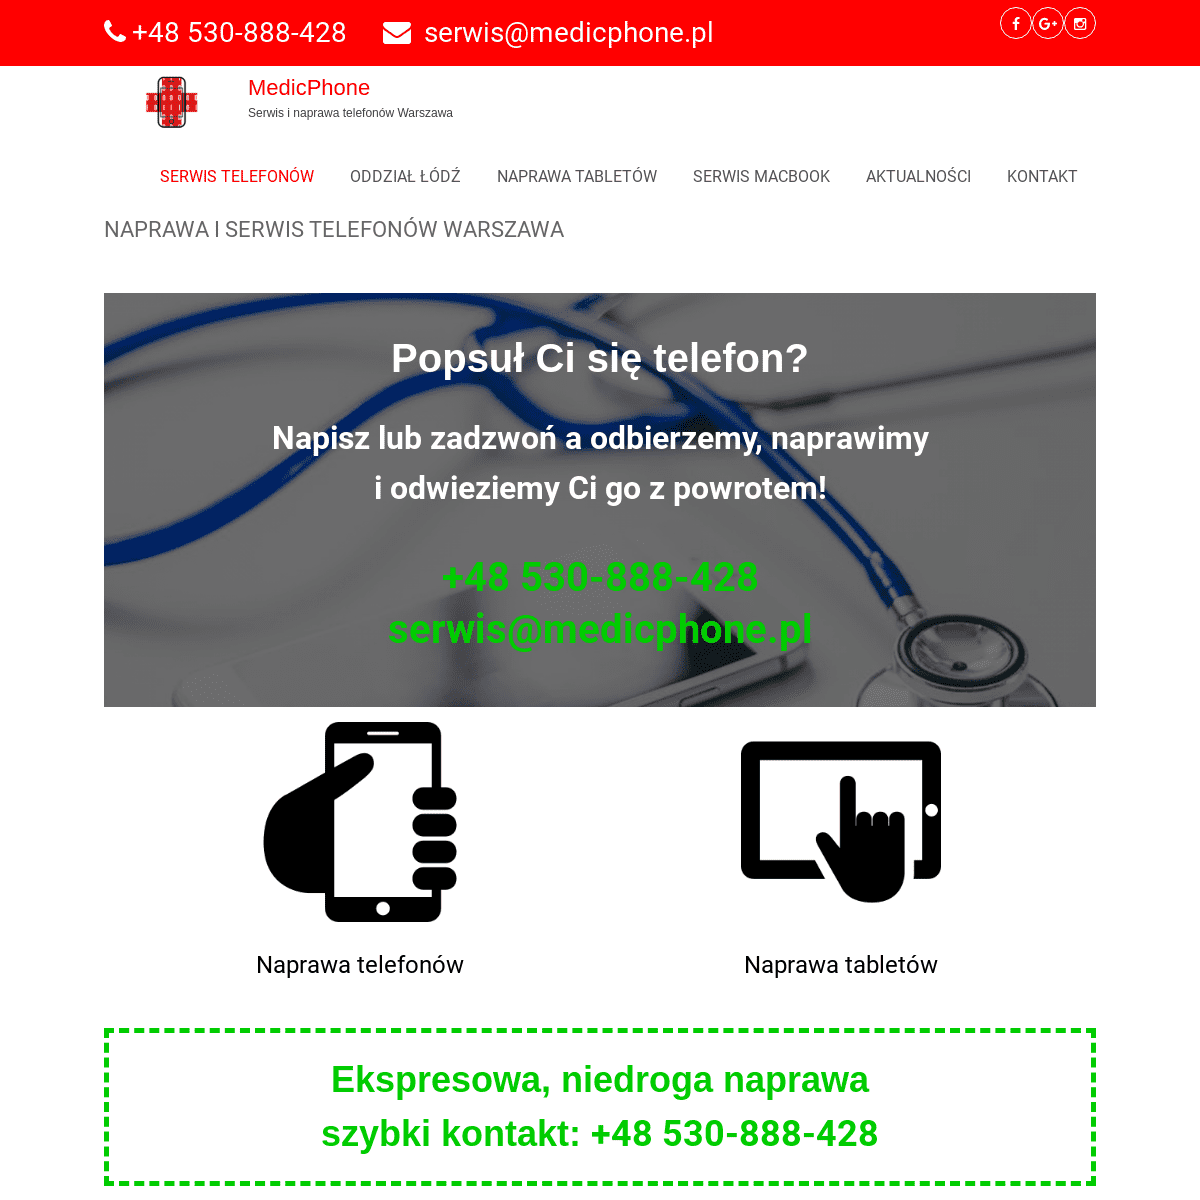 A complete backup of https://medicphone.pl